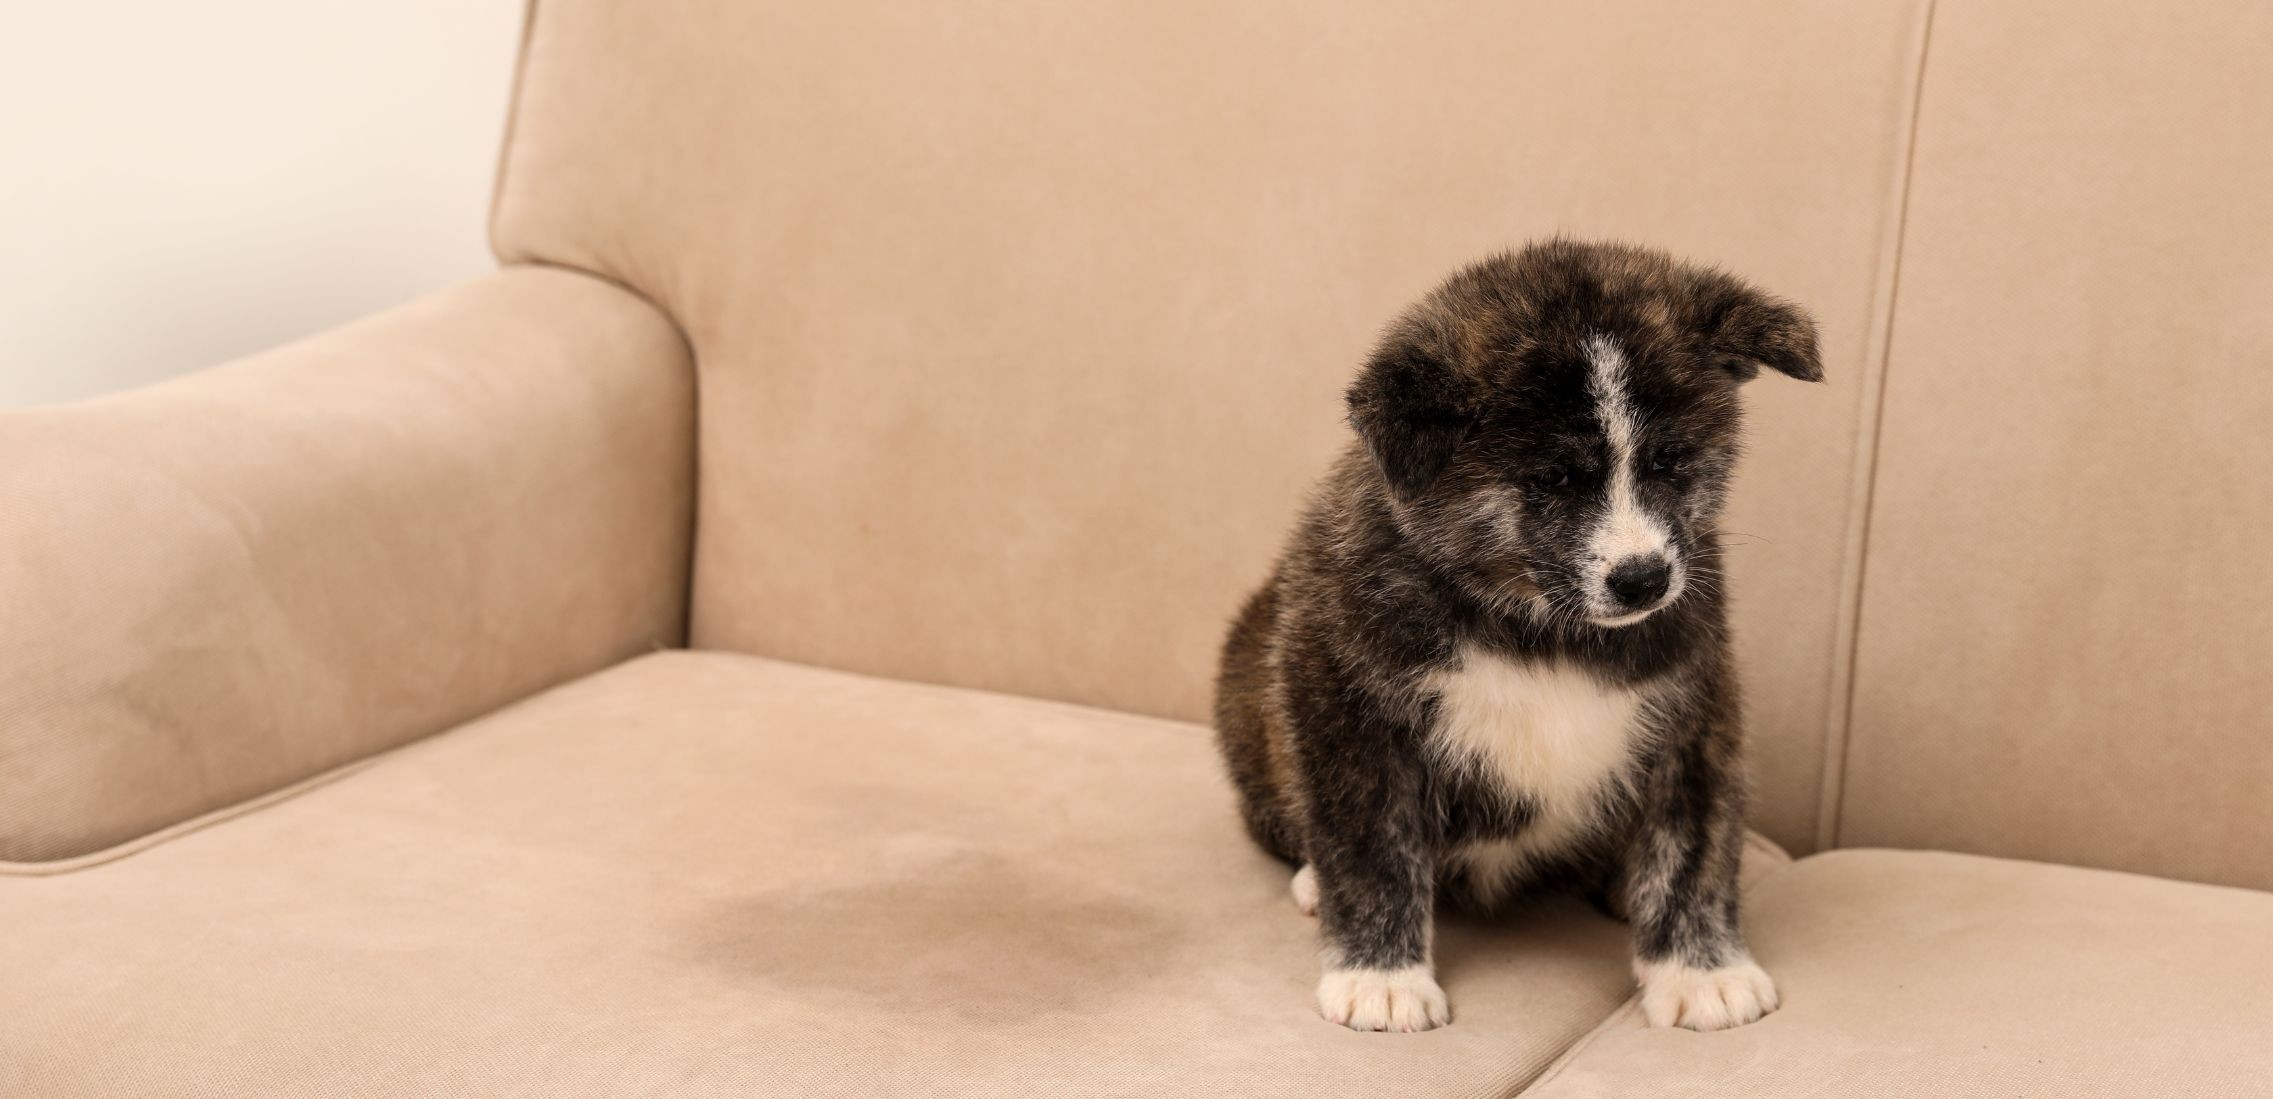 Puppy sitting on sofa next to pee stain